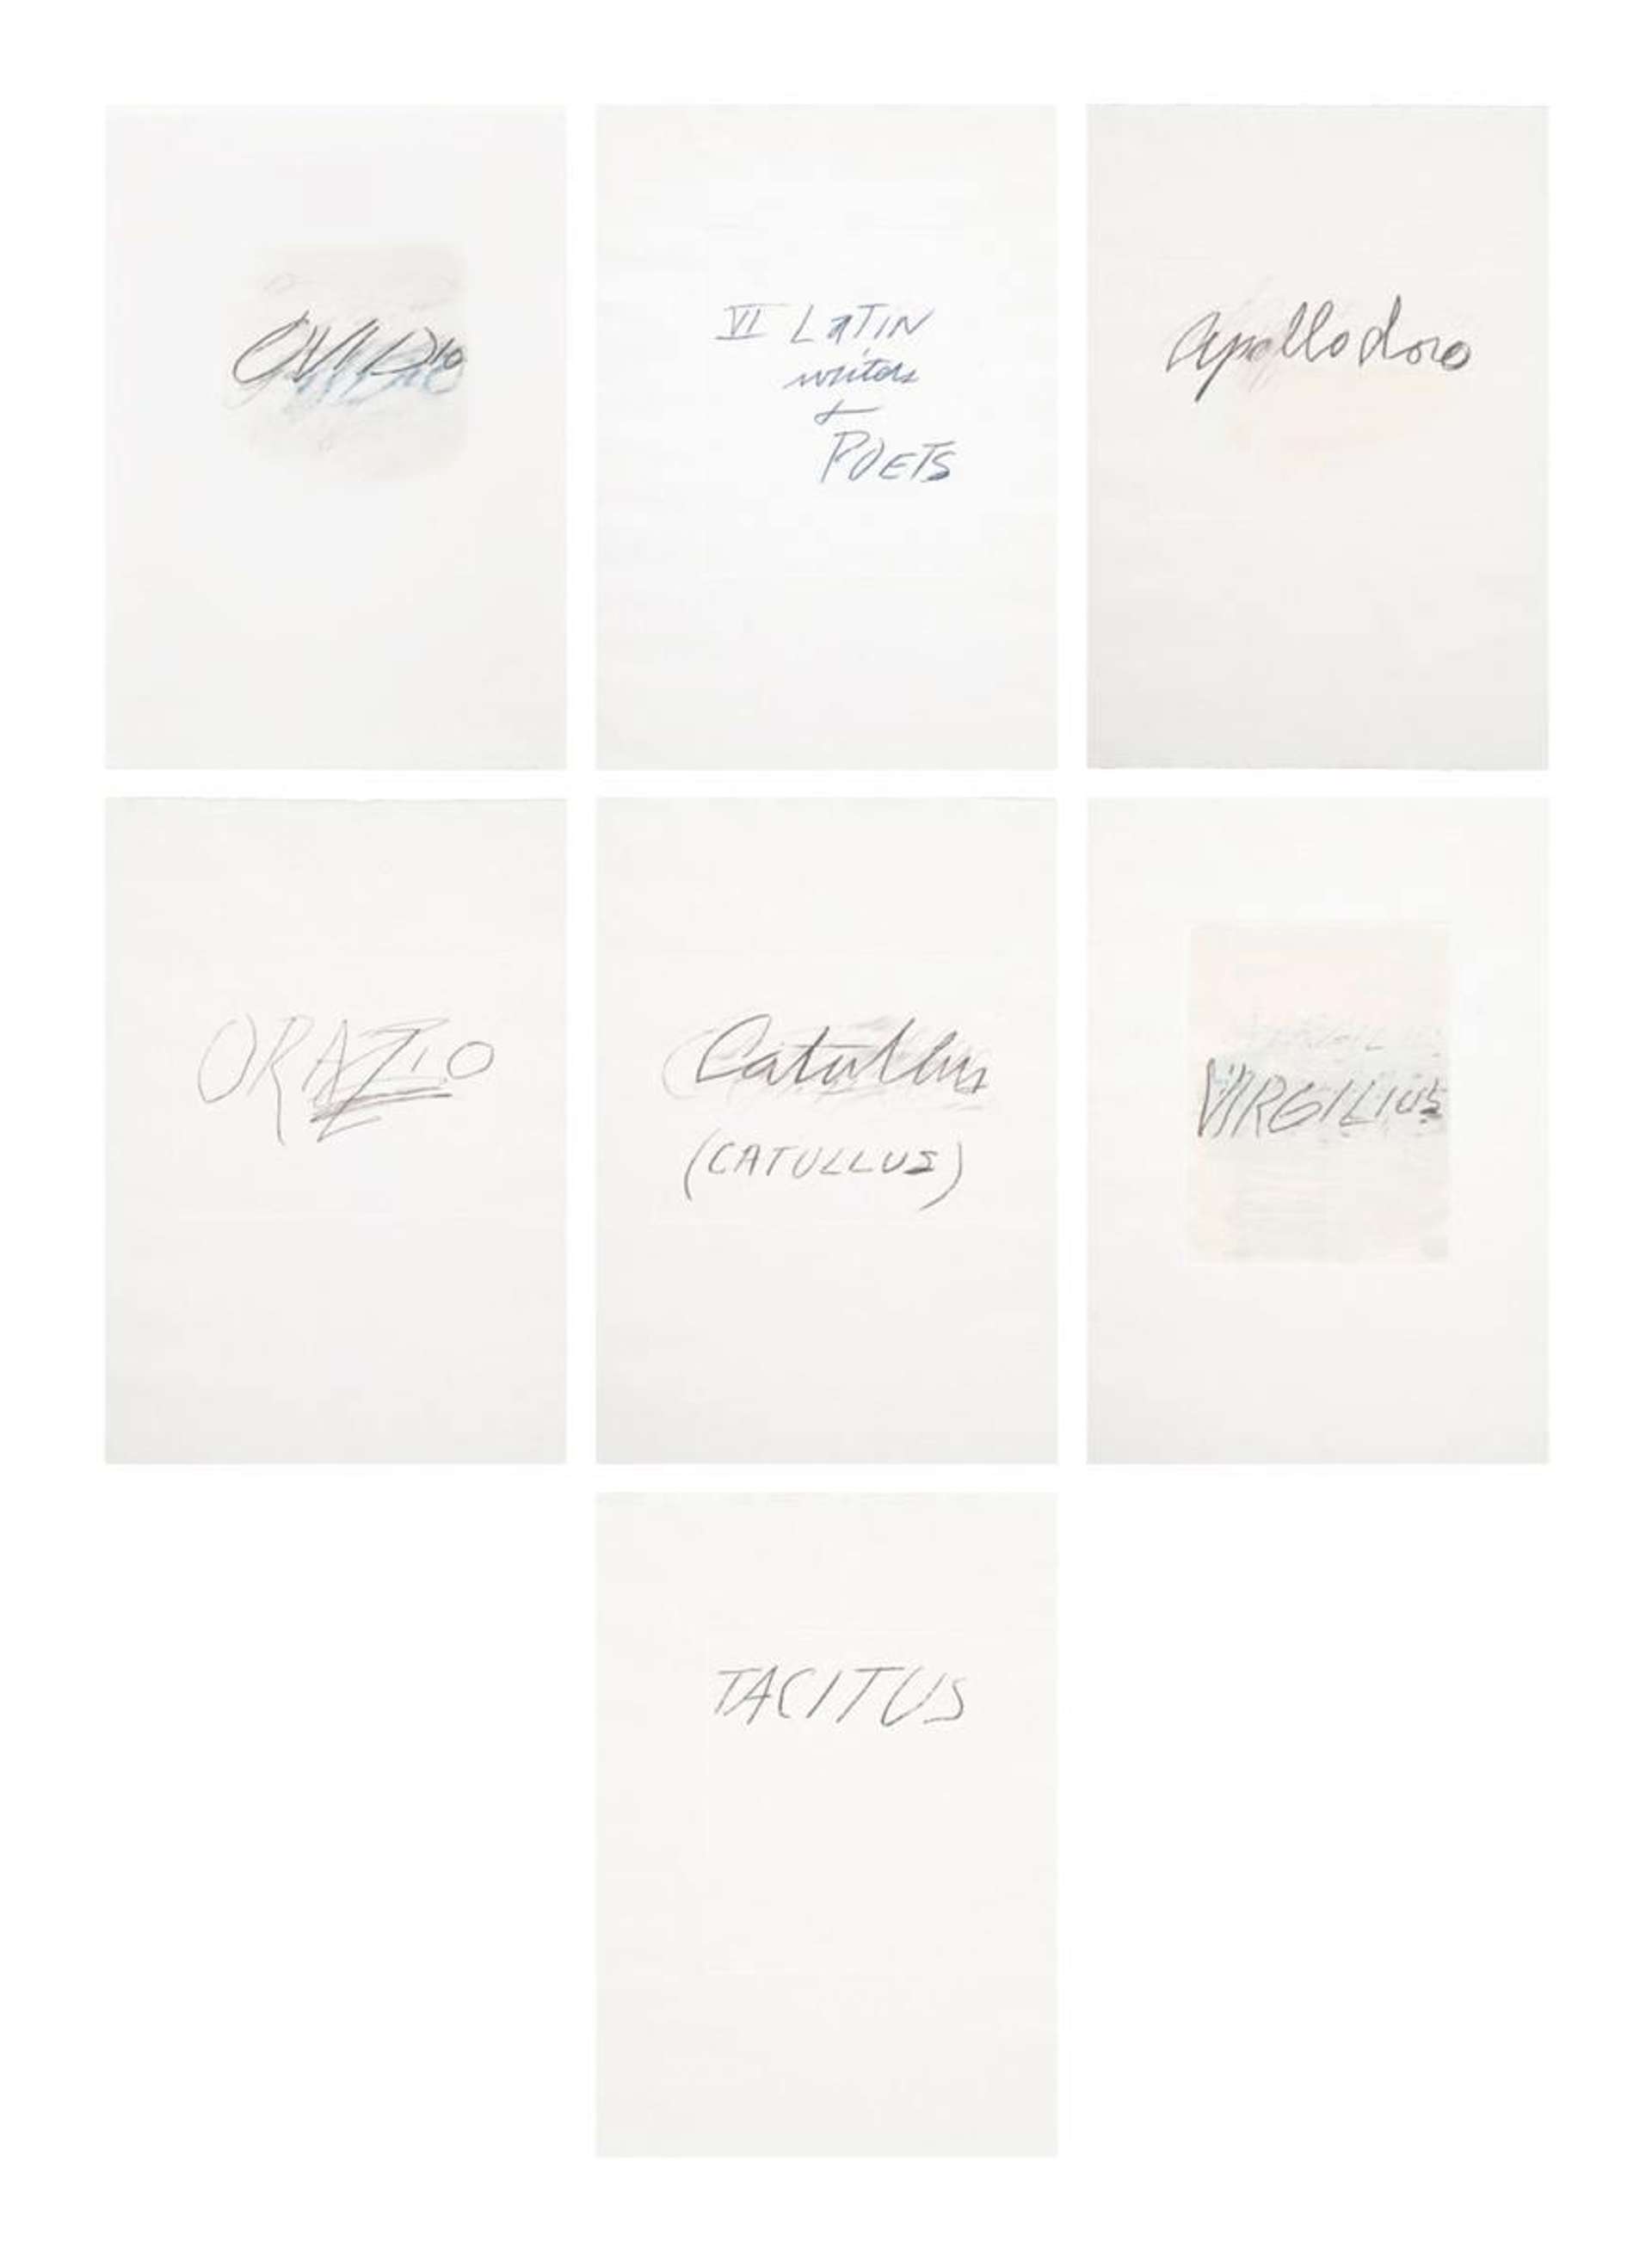 Six Latin Writers And Poets (complete set) - Signed Print by Cy Twombly 1975 - MyArtBroker